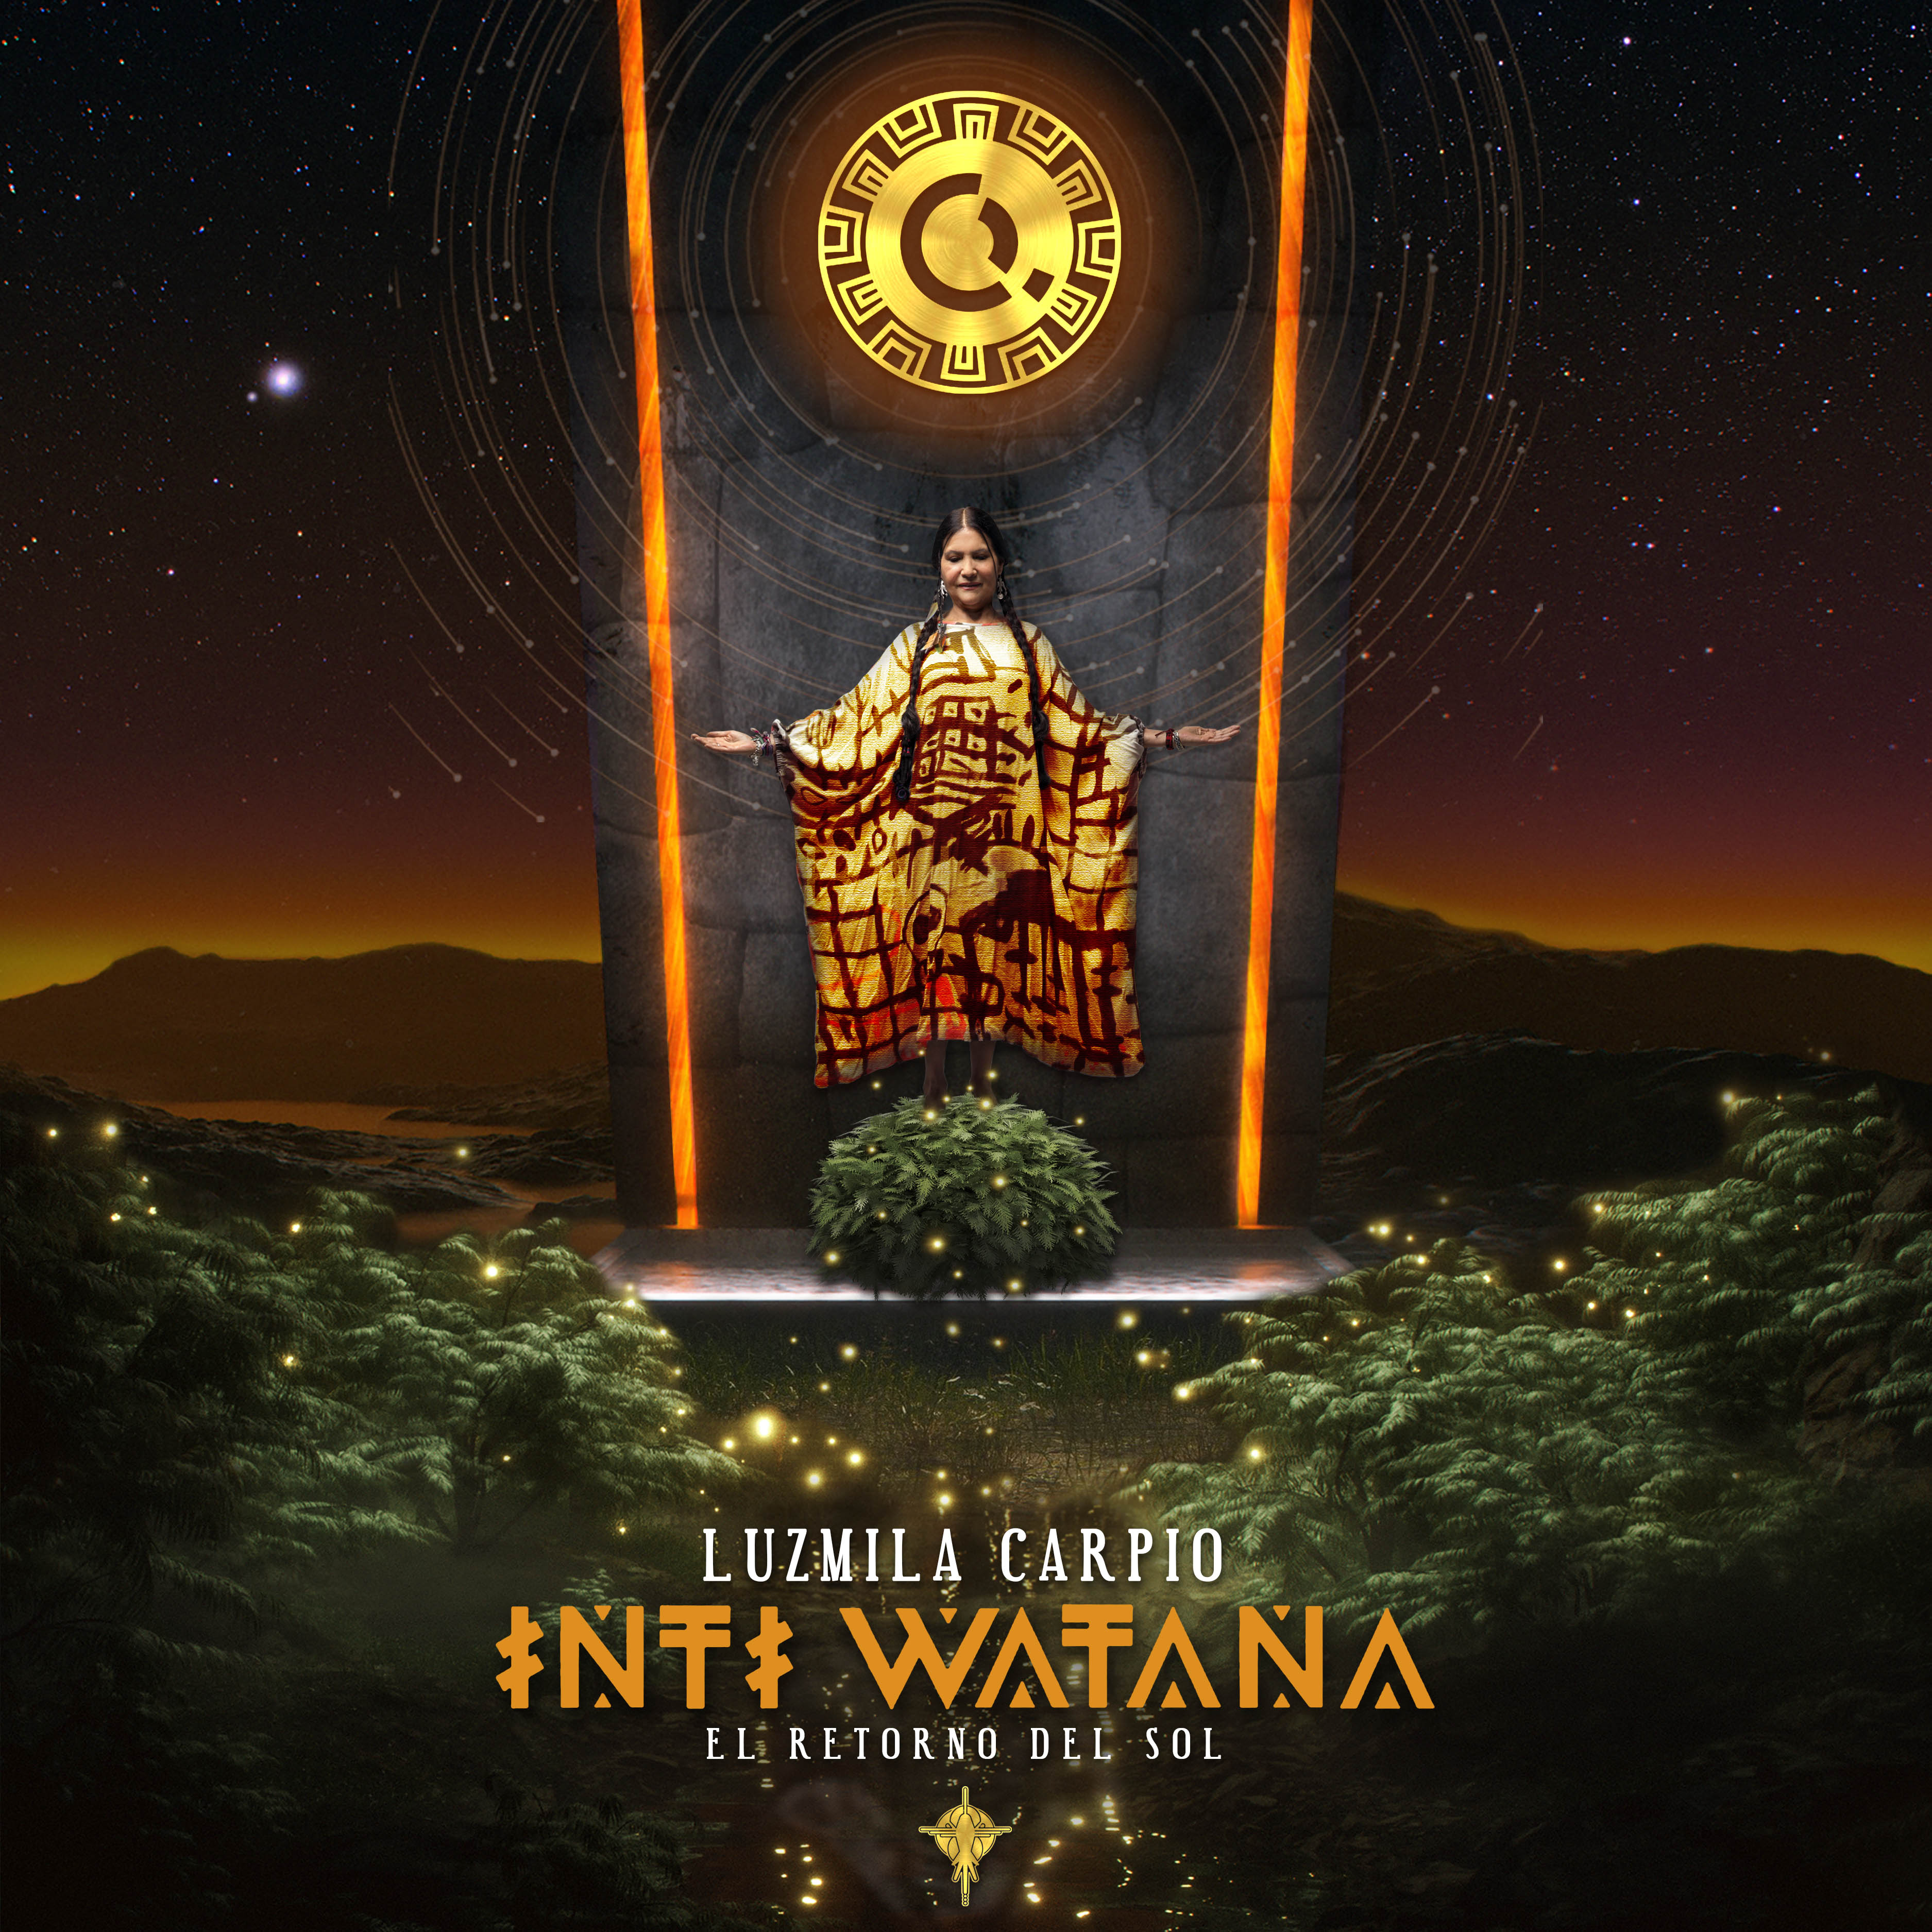 Her first single Inti Watana - El Regreso del Sol is Out Now!